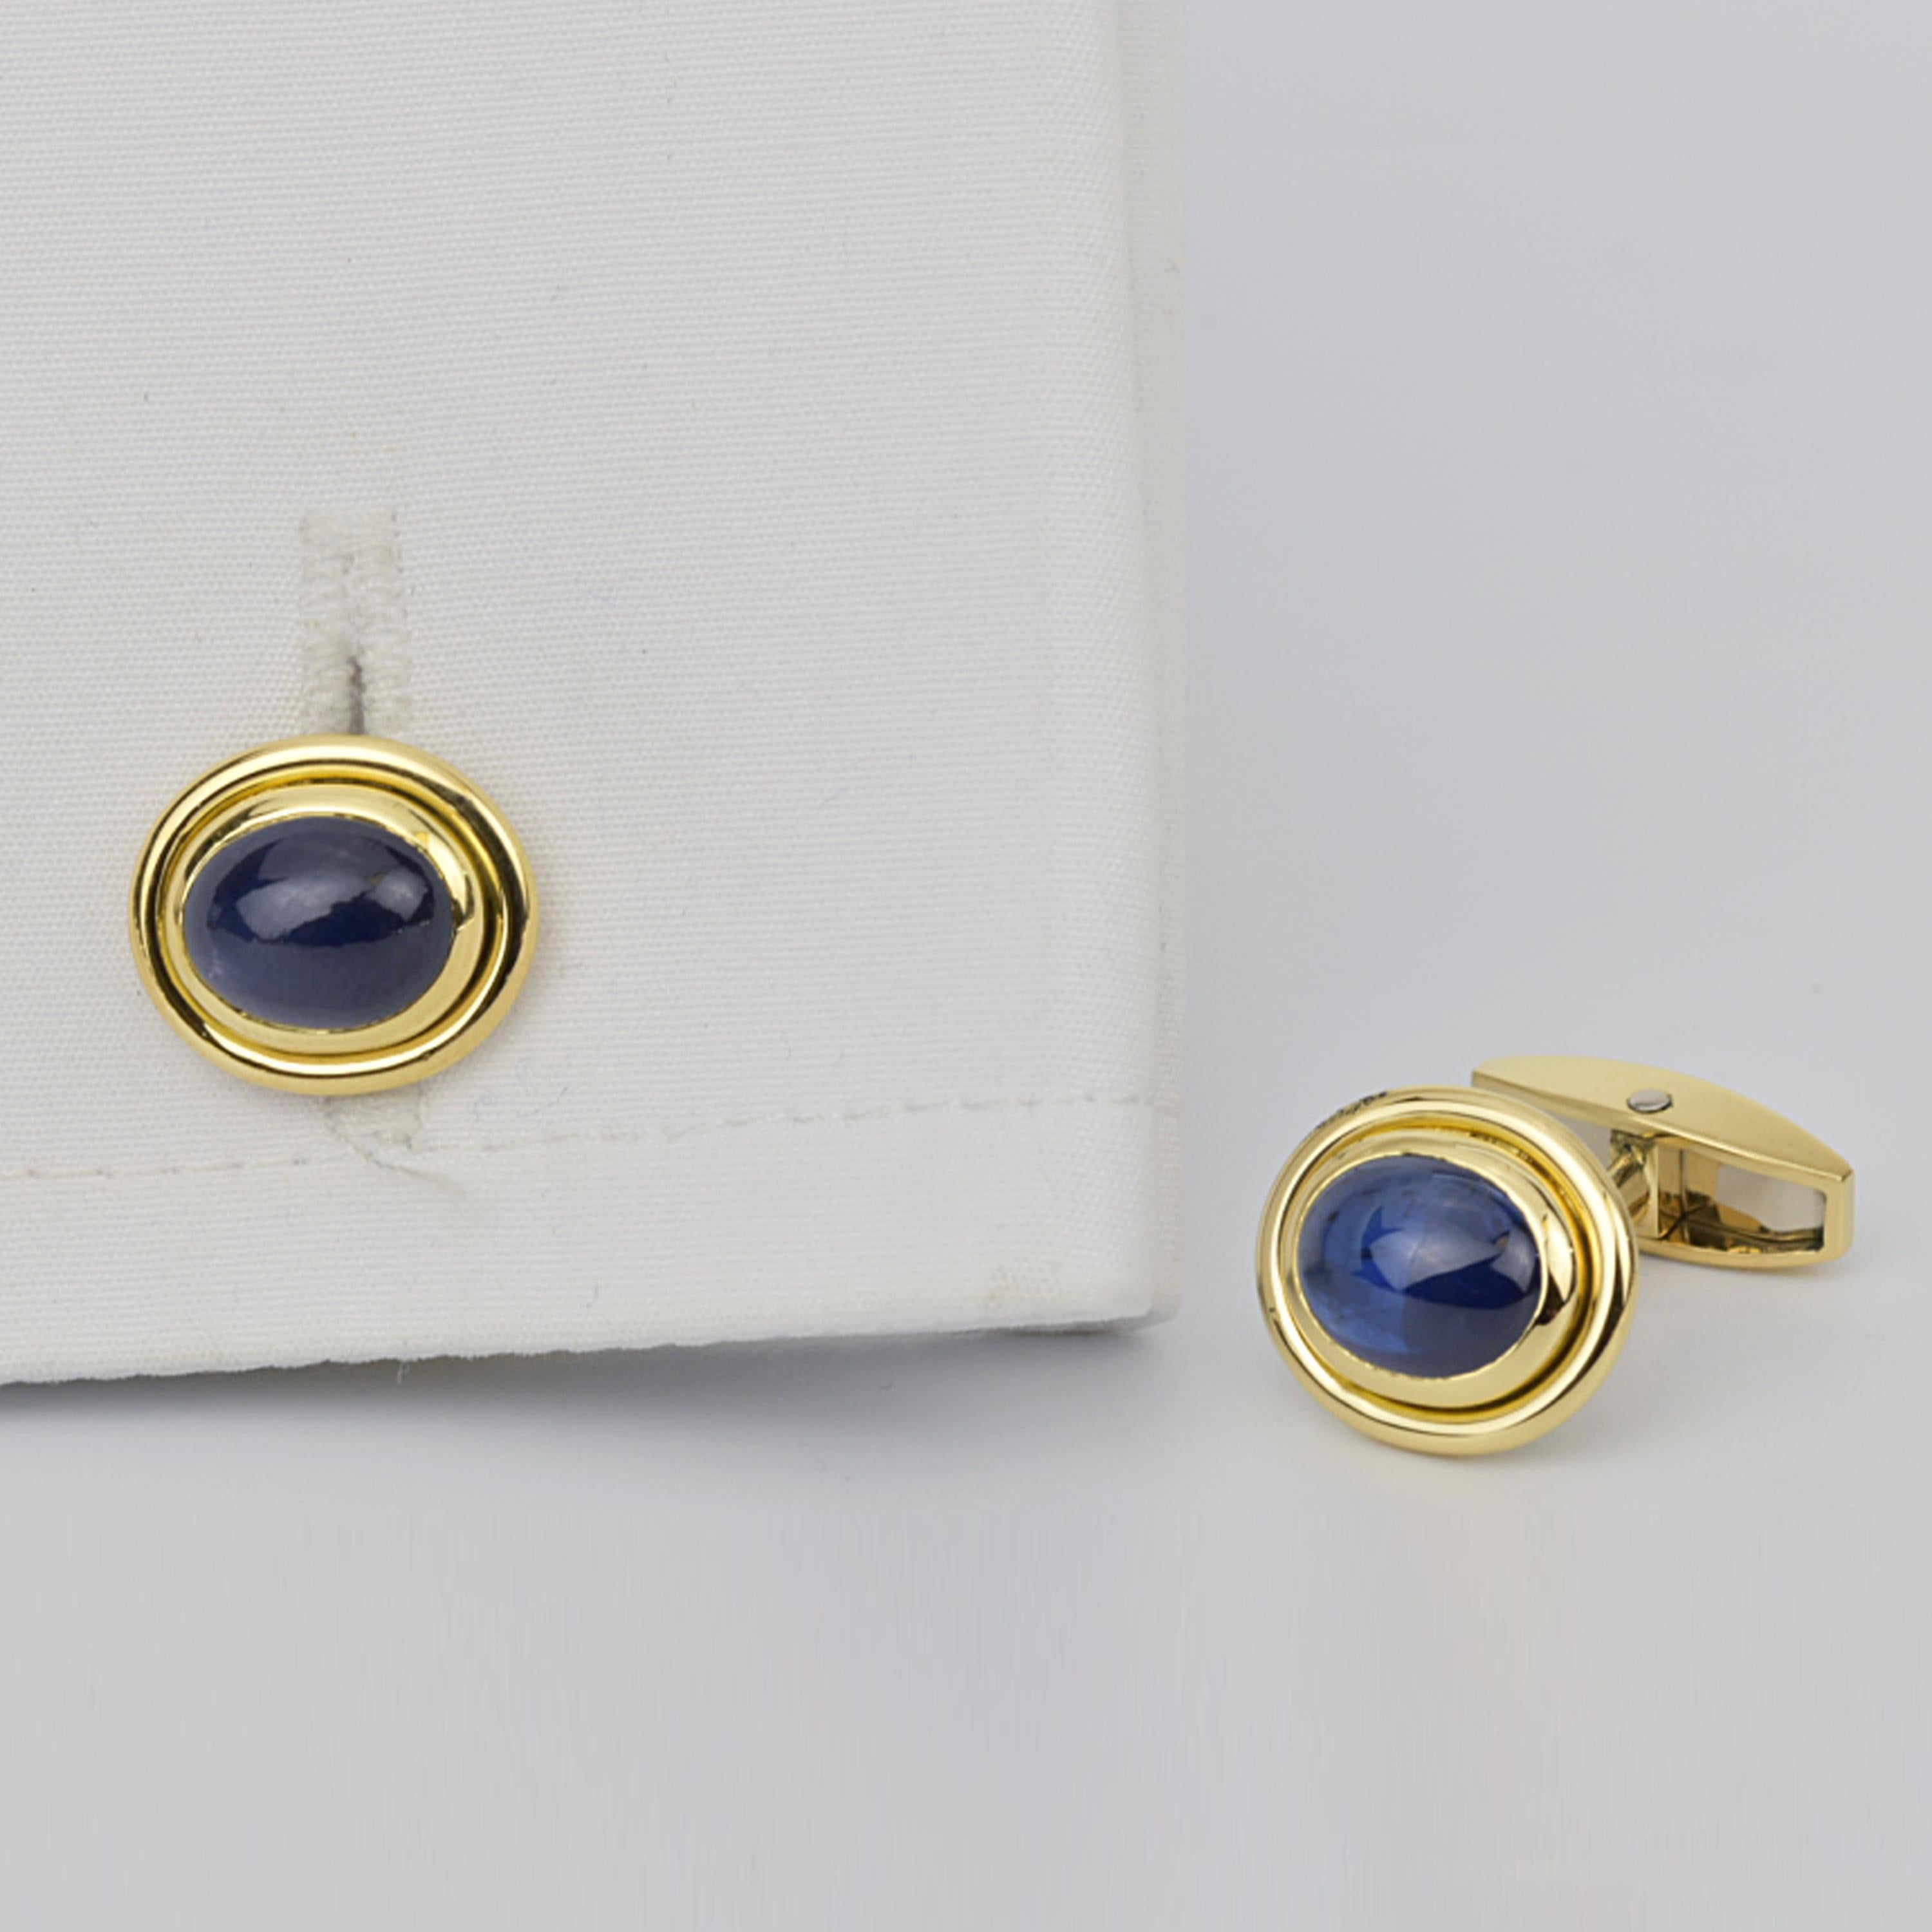 Matthew Cambery 18K Yellow Gold Cufflinks set with Oval Cabochon Sapphires. T Bar Fitting.

